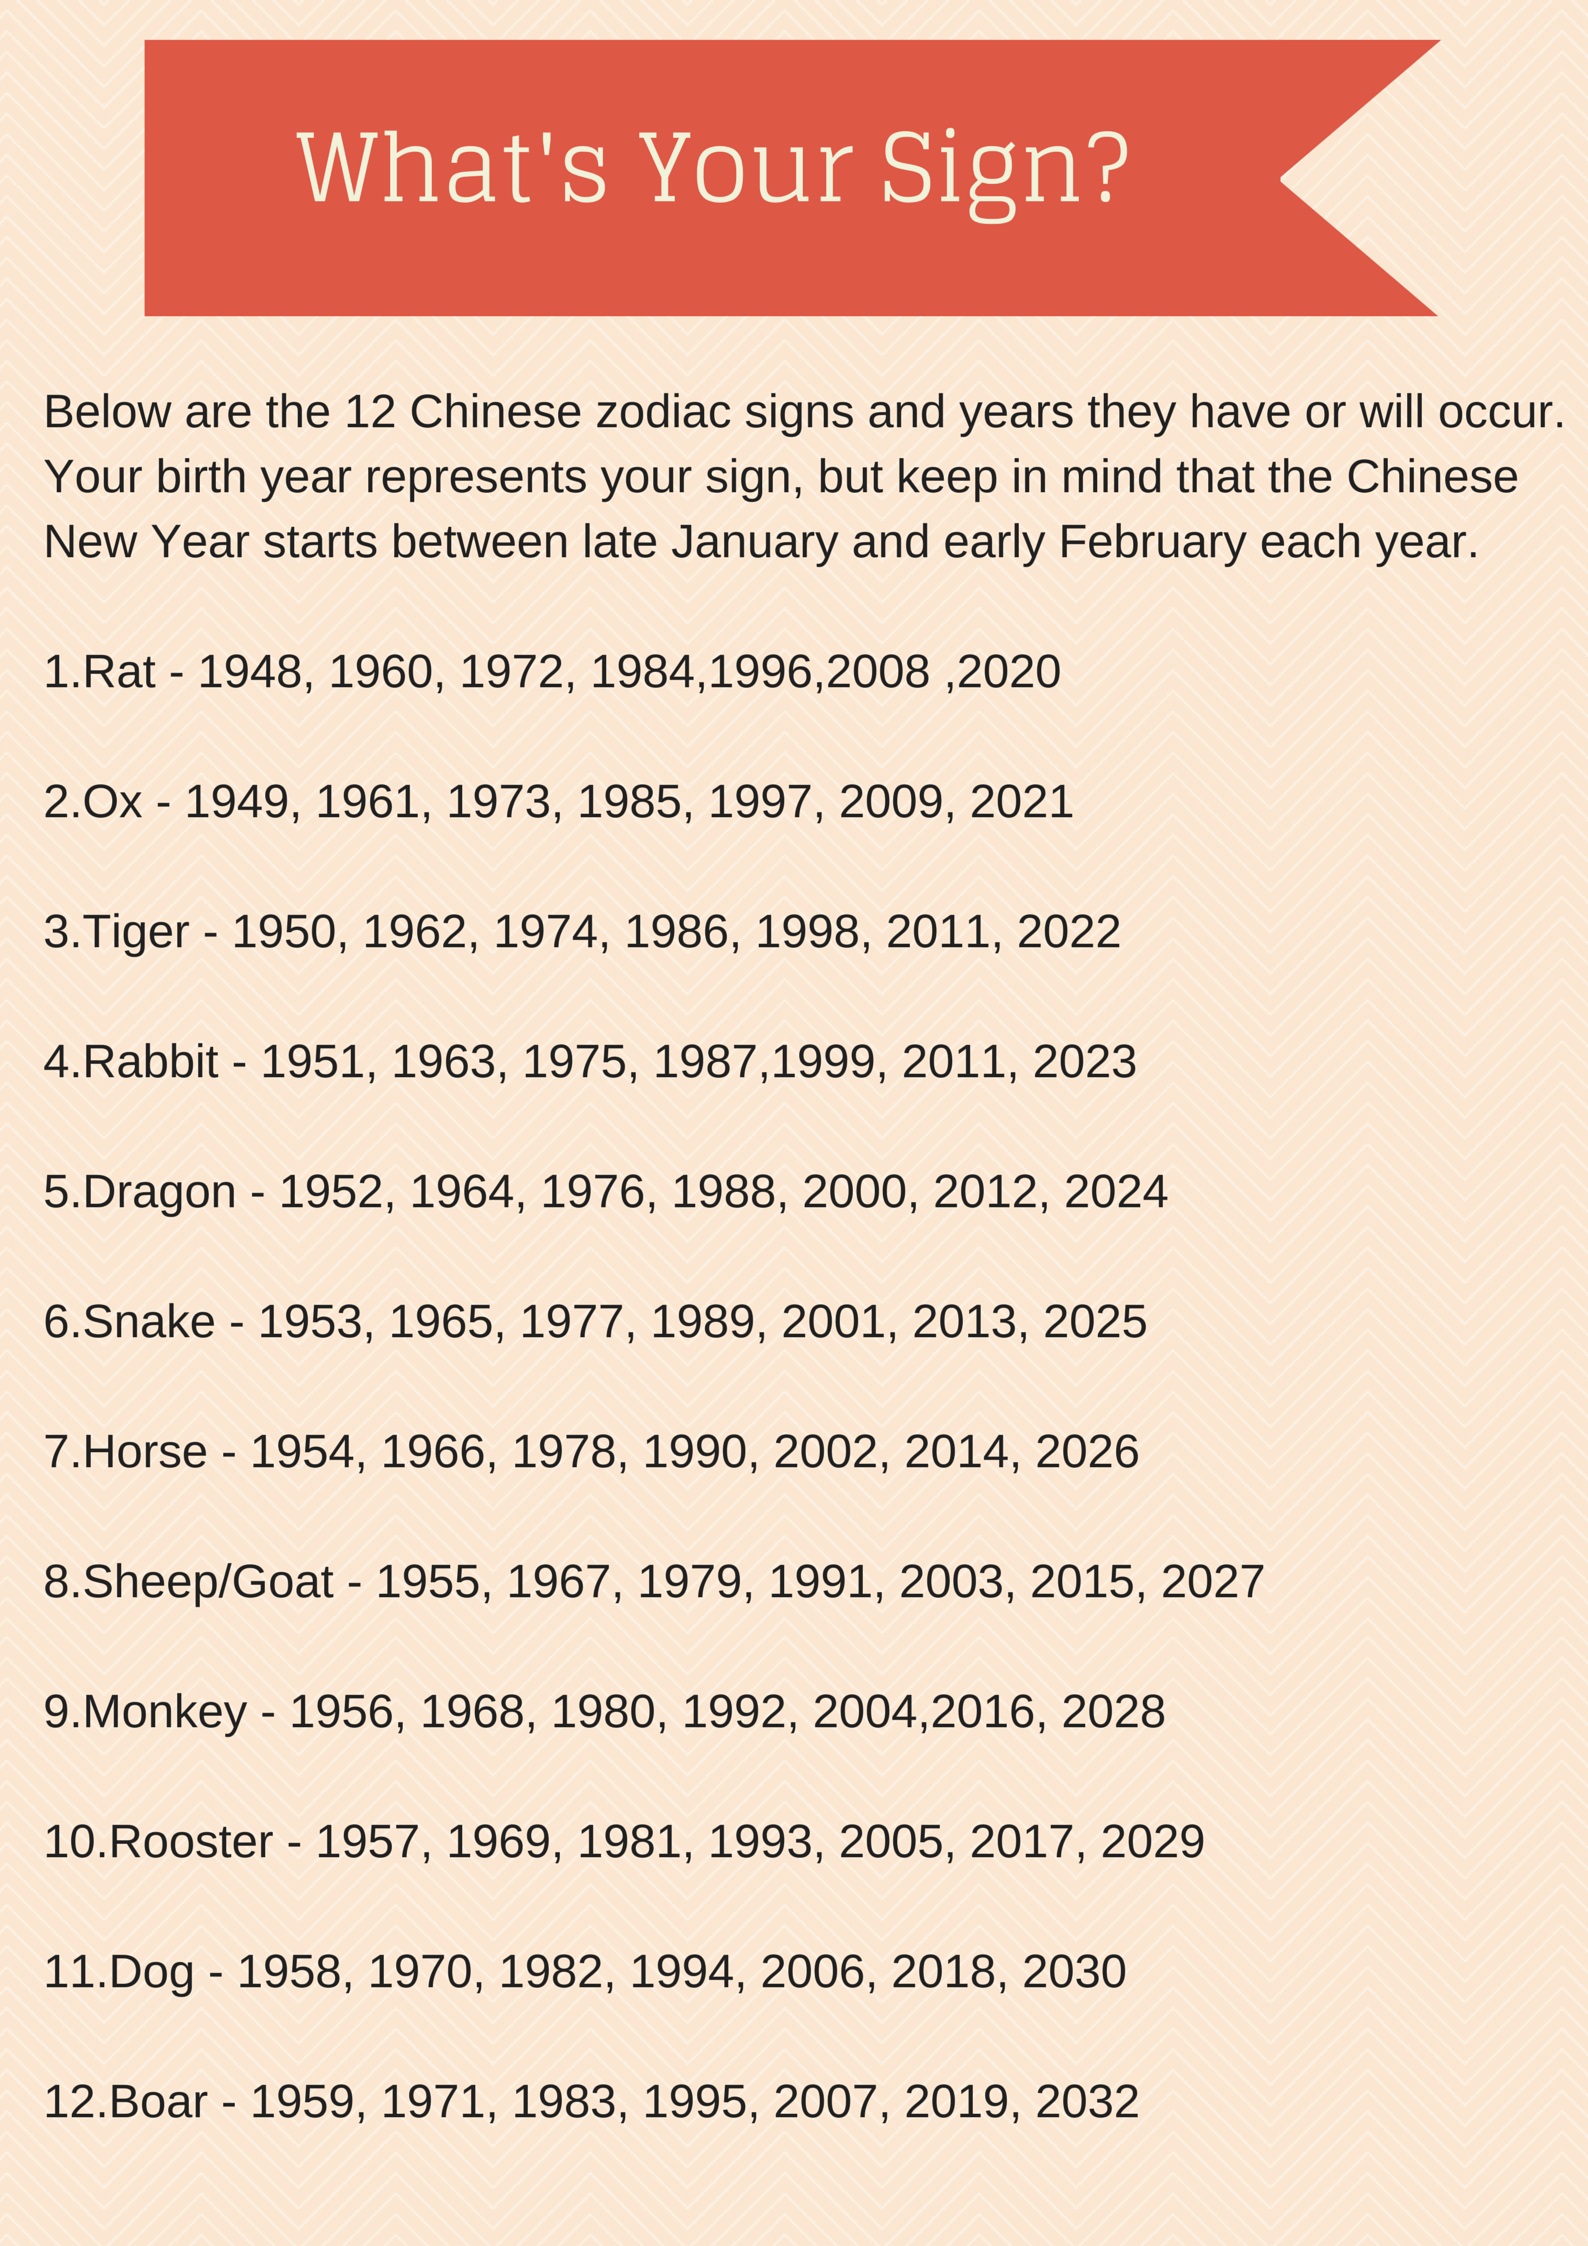 Chinese Zodiac Signs: The Origins and Meanings